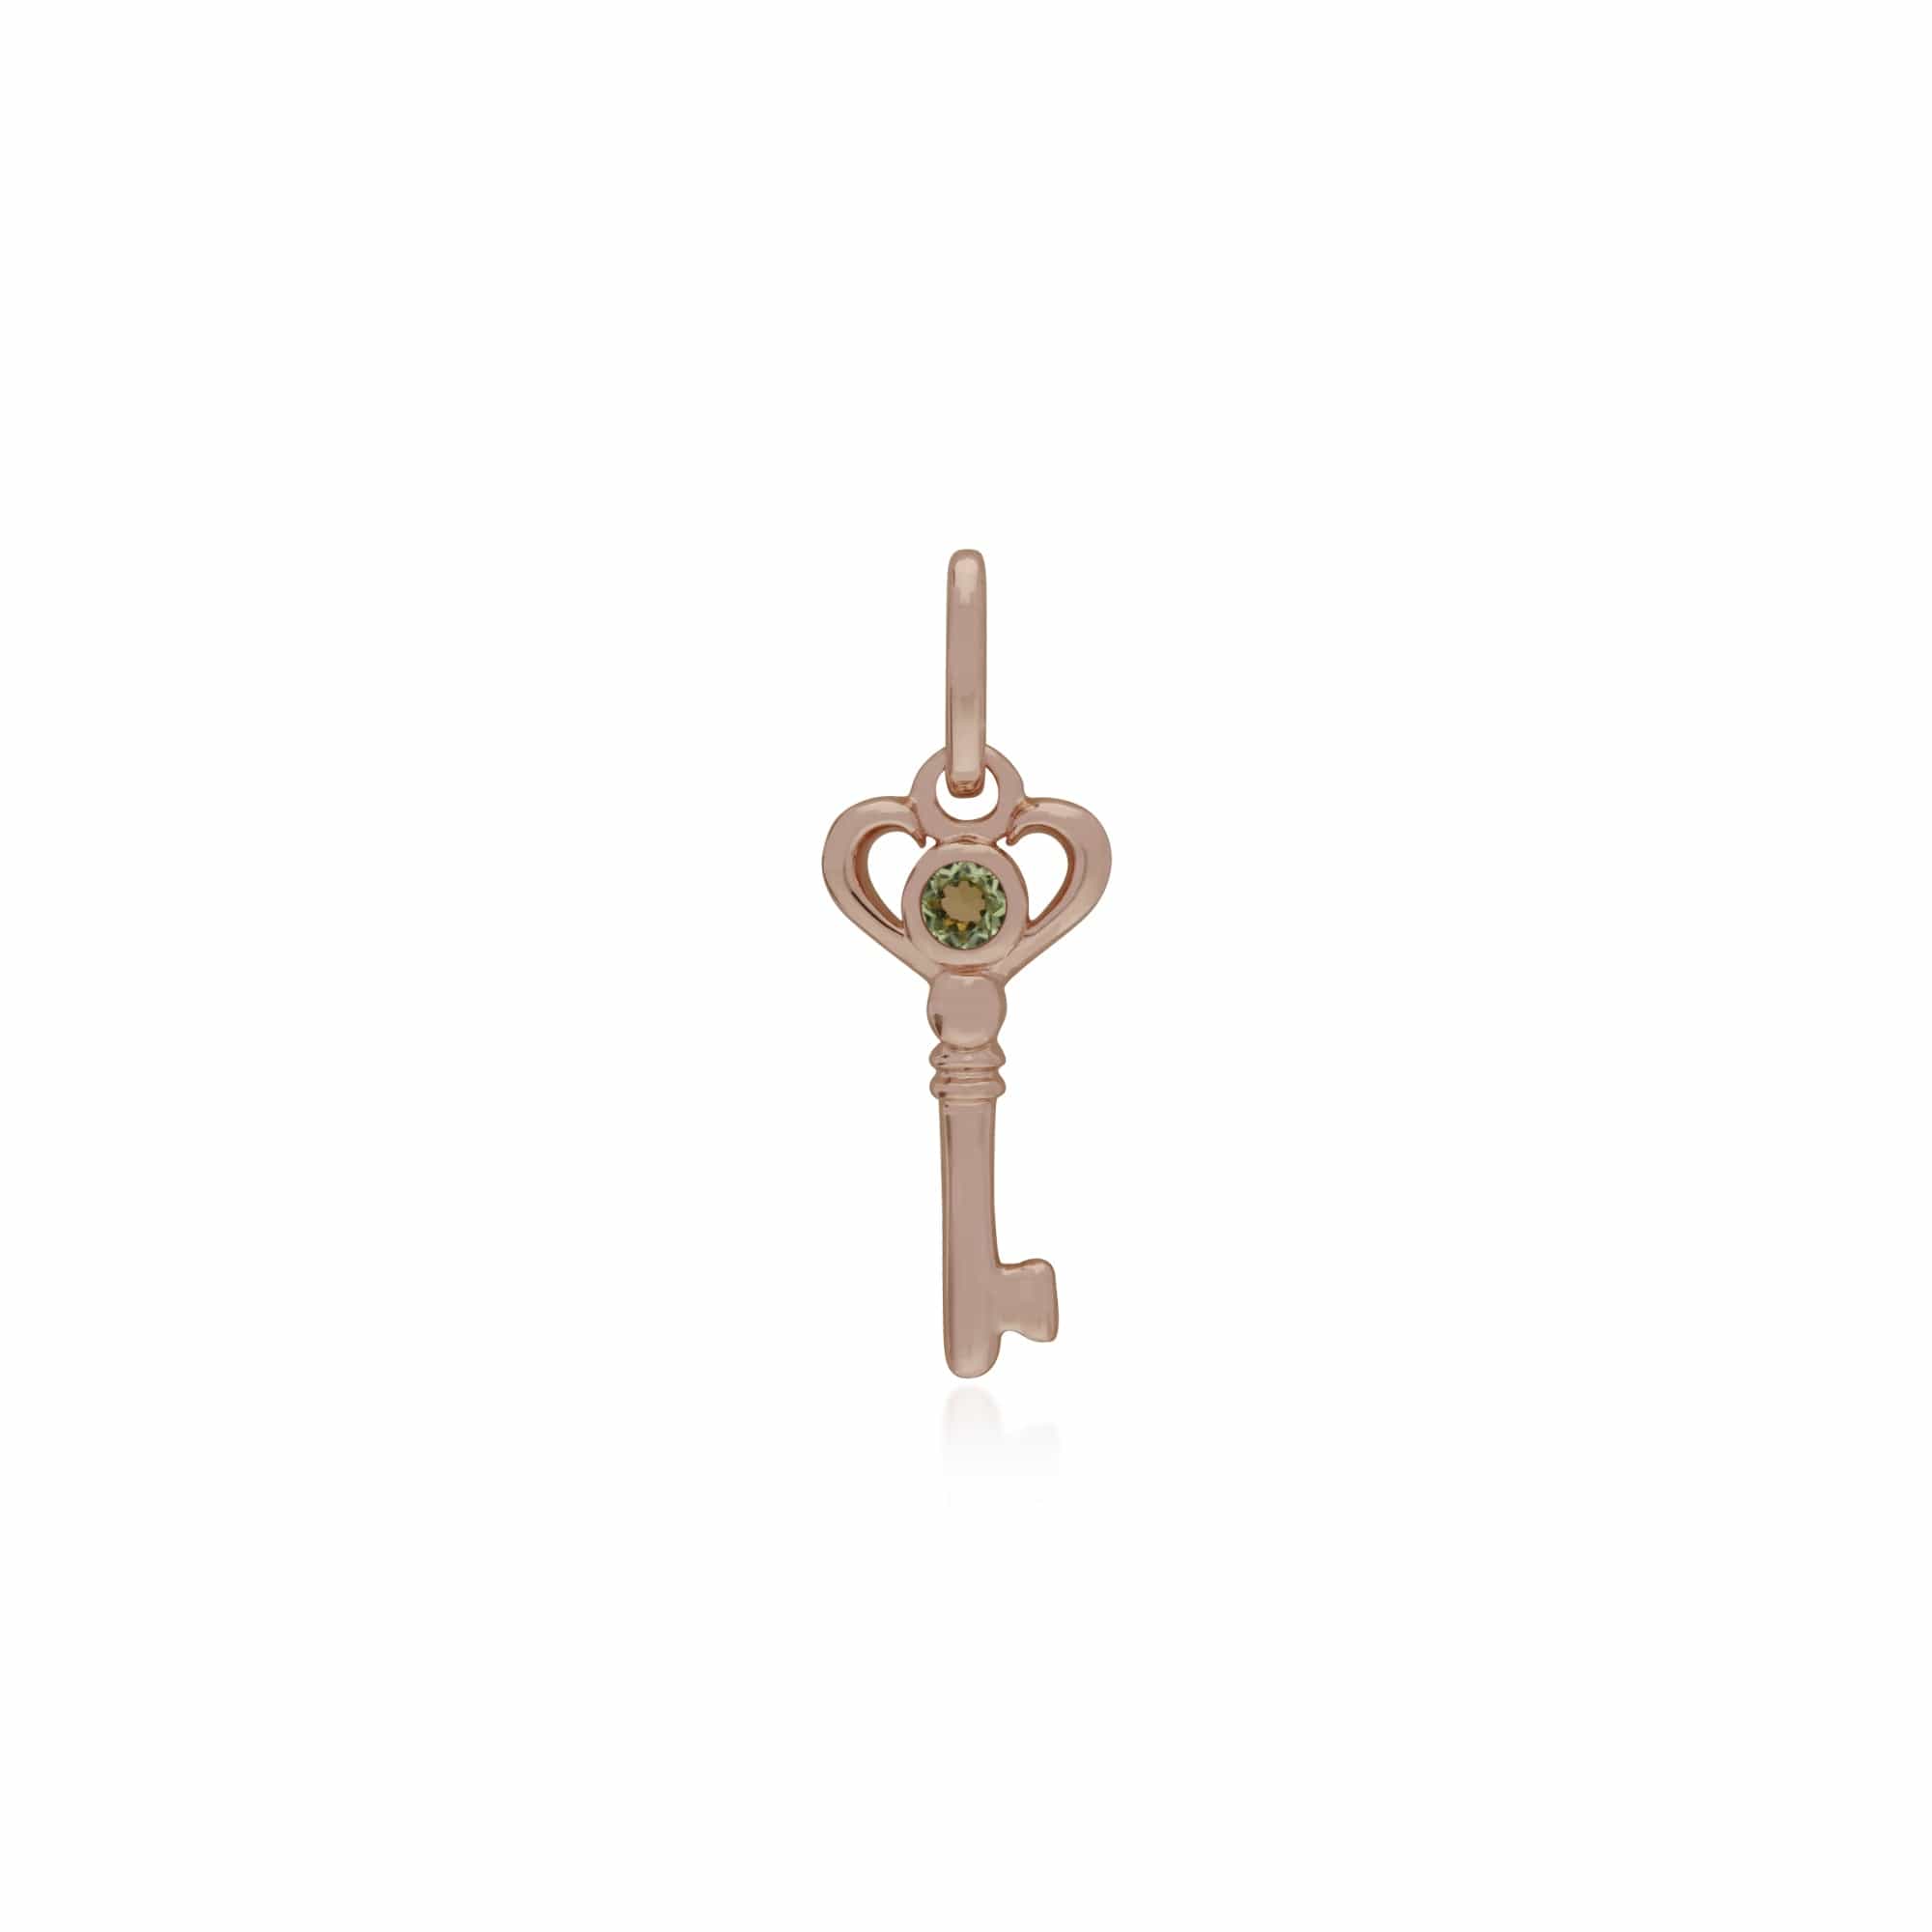 270P026307925-270P026501925 Classic Swirl Heart Lock Pendant & Peridot Key Charm in Rose Gold Plated 925 Sterling Silver 2